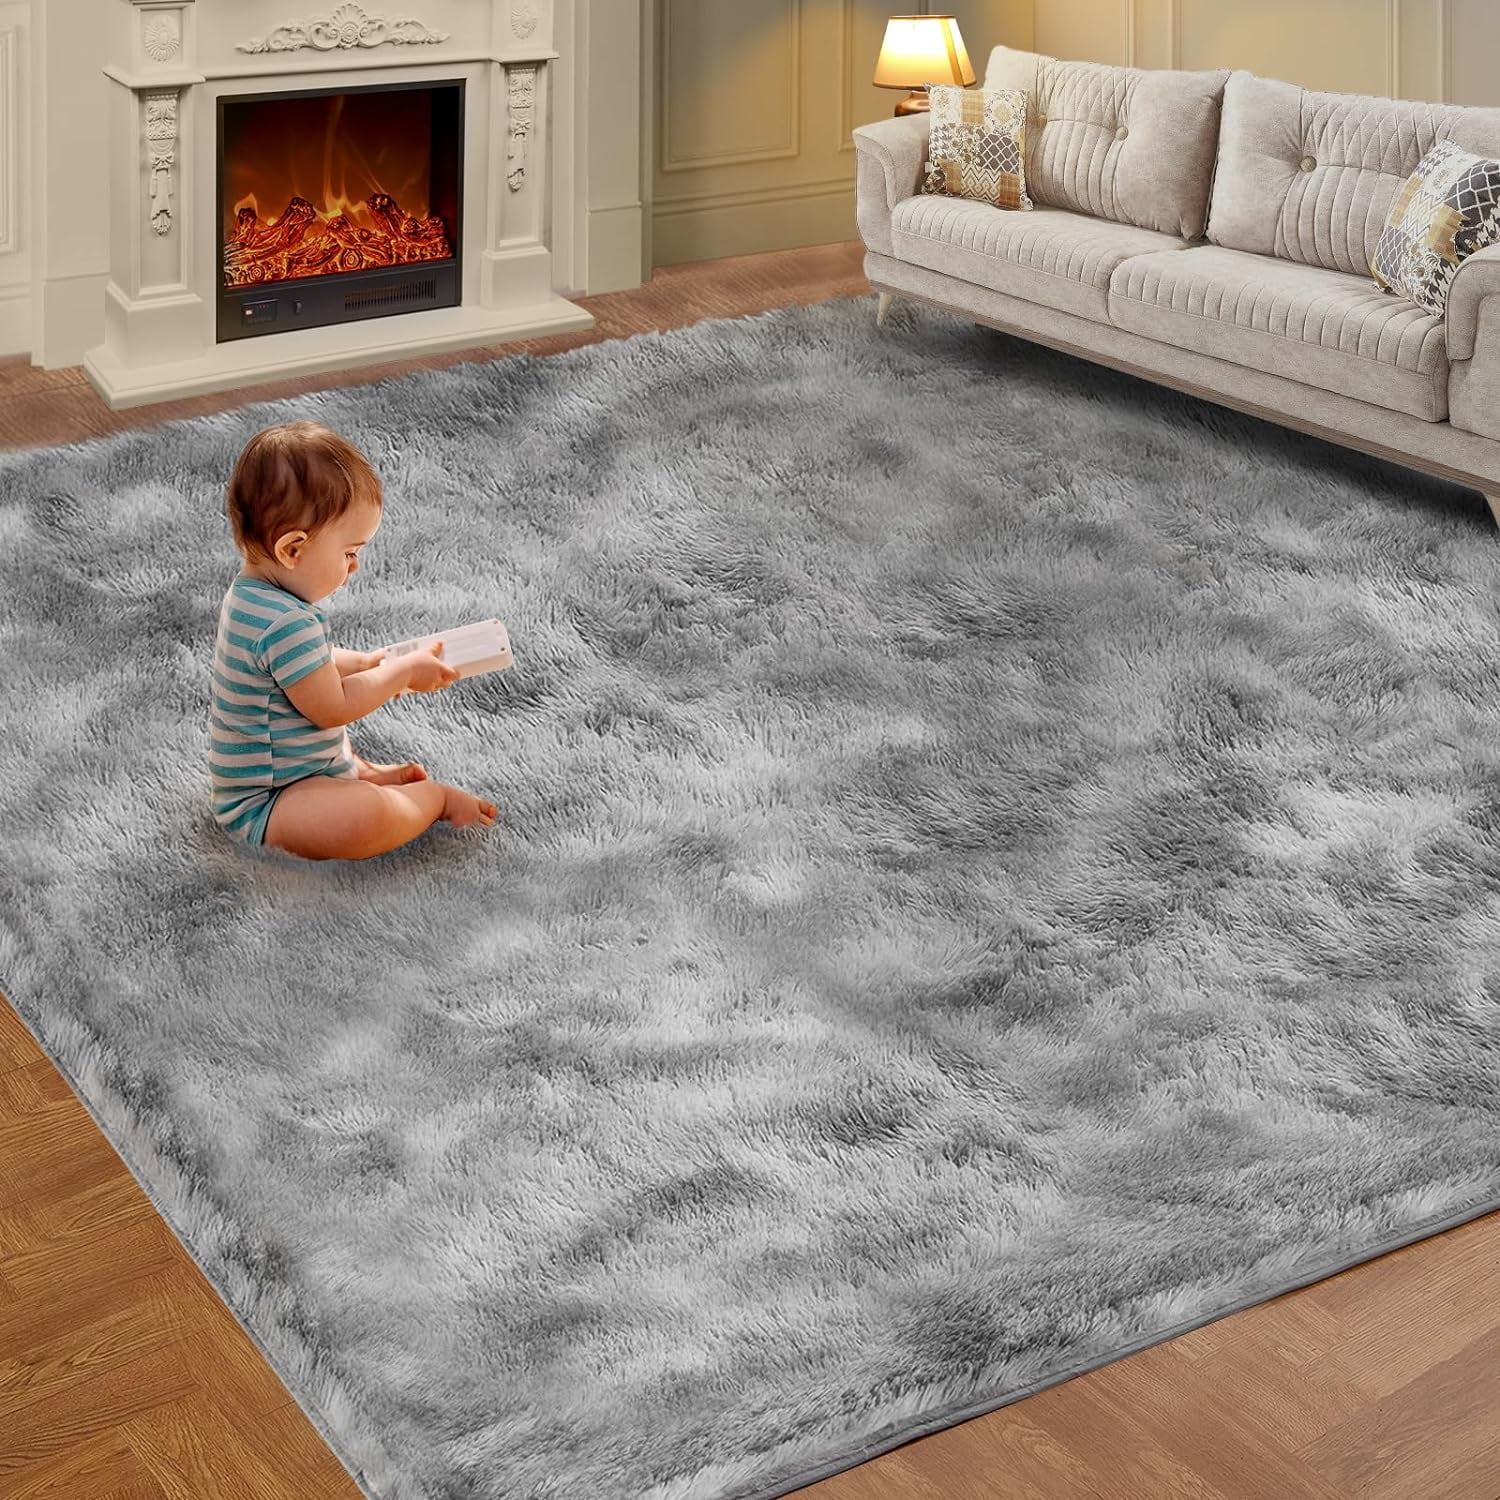 Fluffy Soft Rugs for Living Room Thick Plush Area Rug Decor Bedroom Prayer  Mats Carpet for Children Rooms Product without Turkey